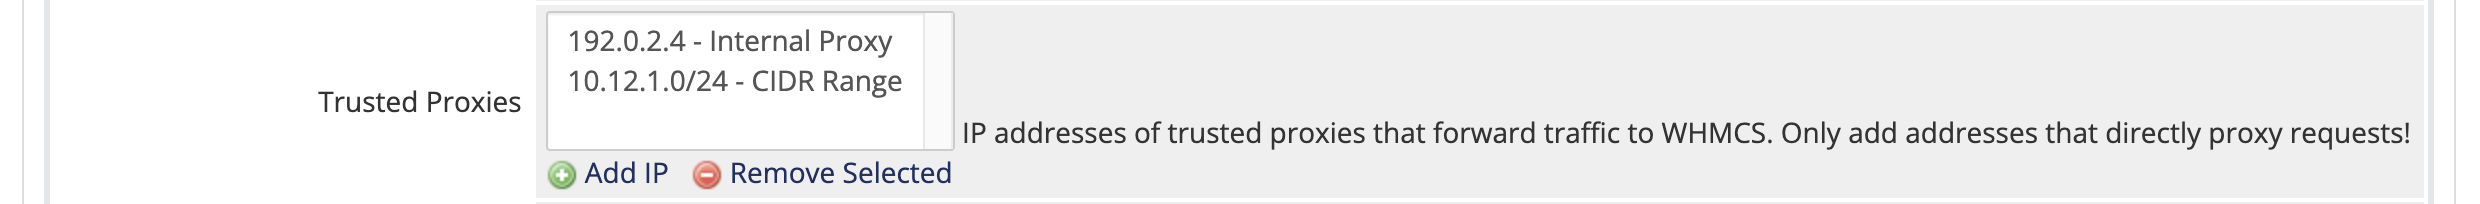 The Trusted Proxies setting in General Settings